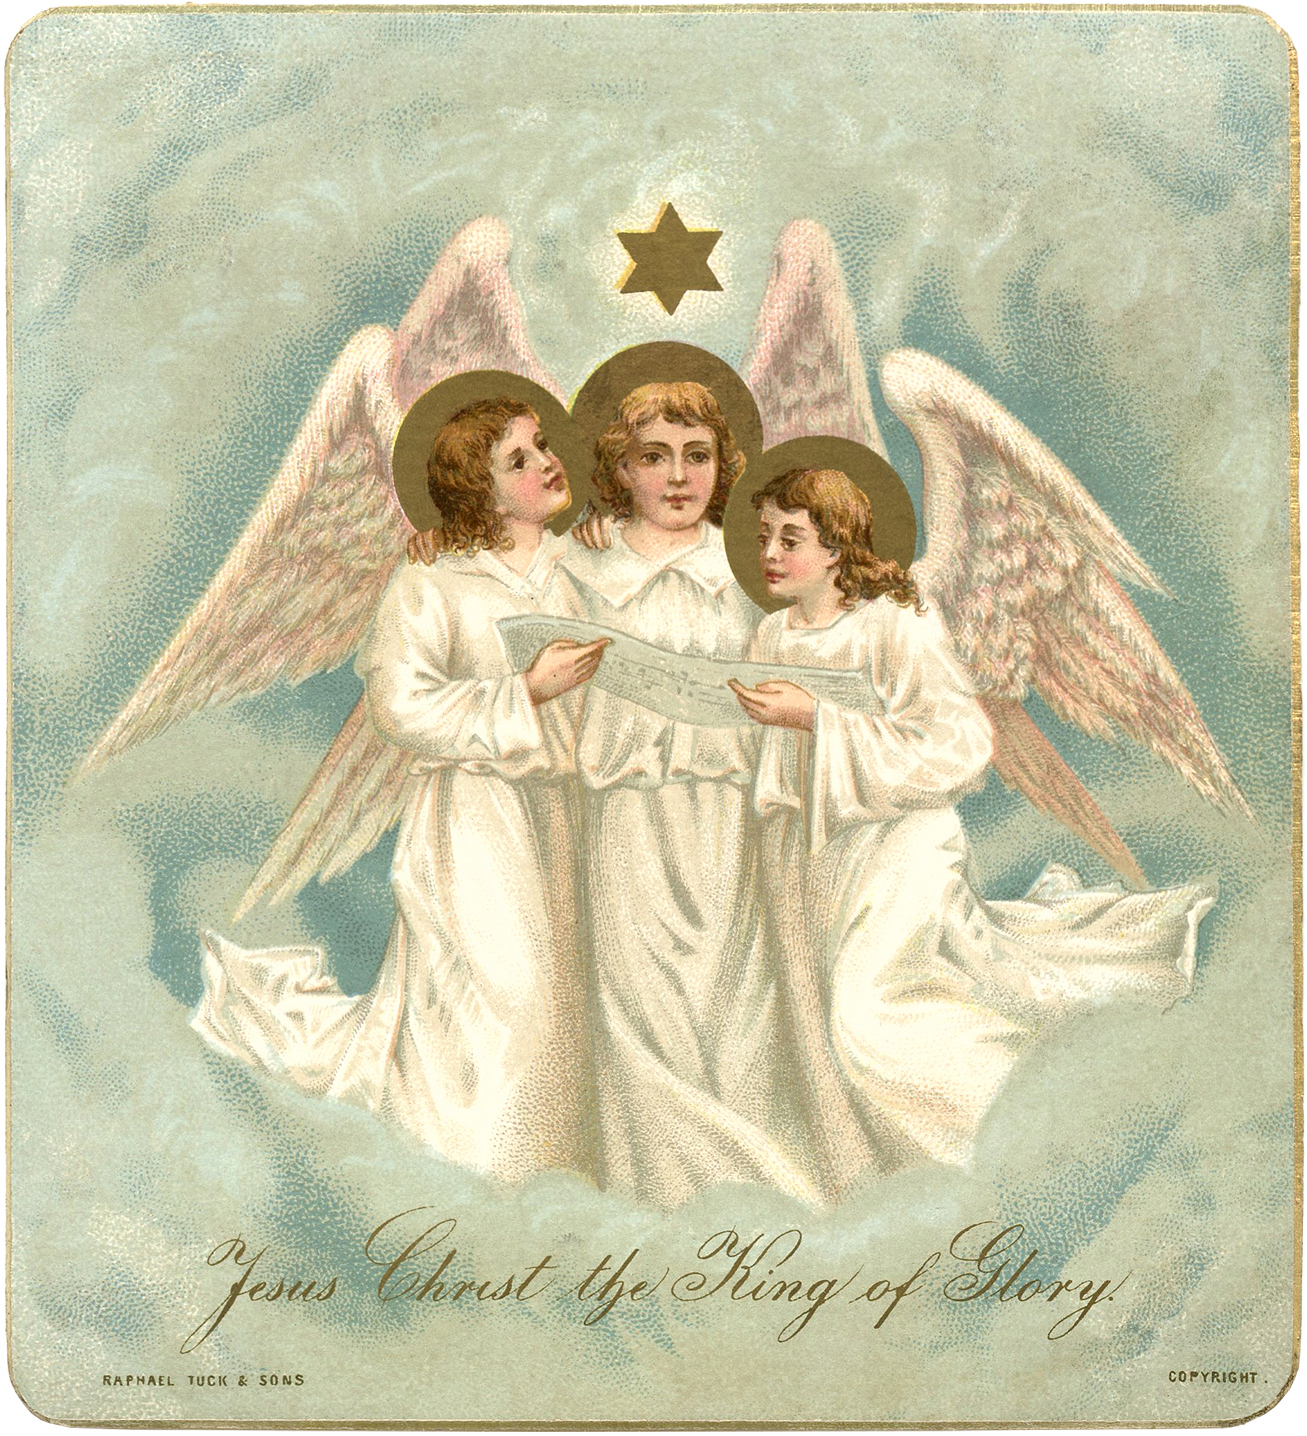 free christian clipart of angels - photo #46